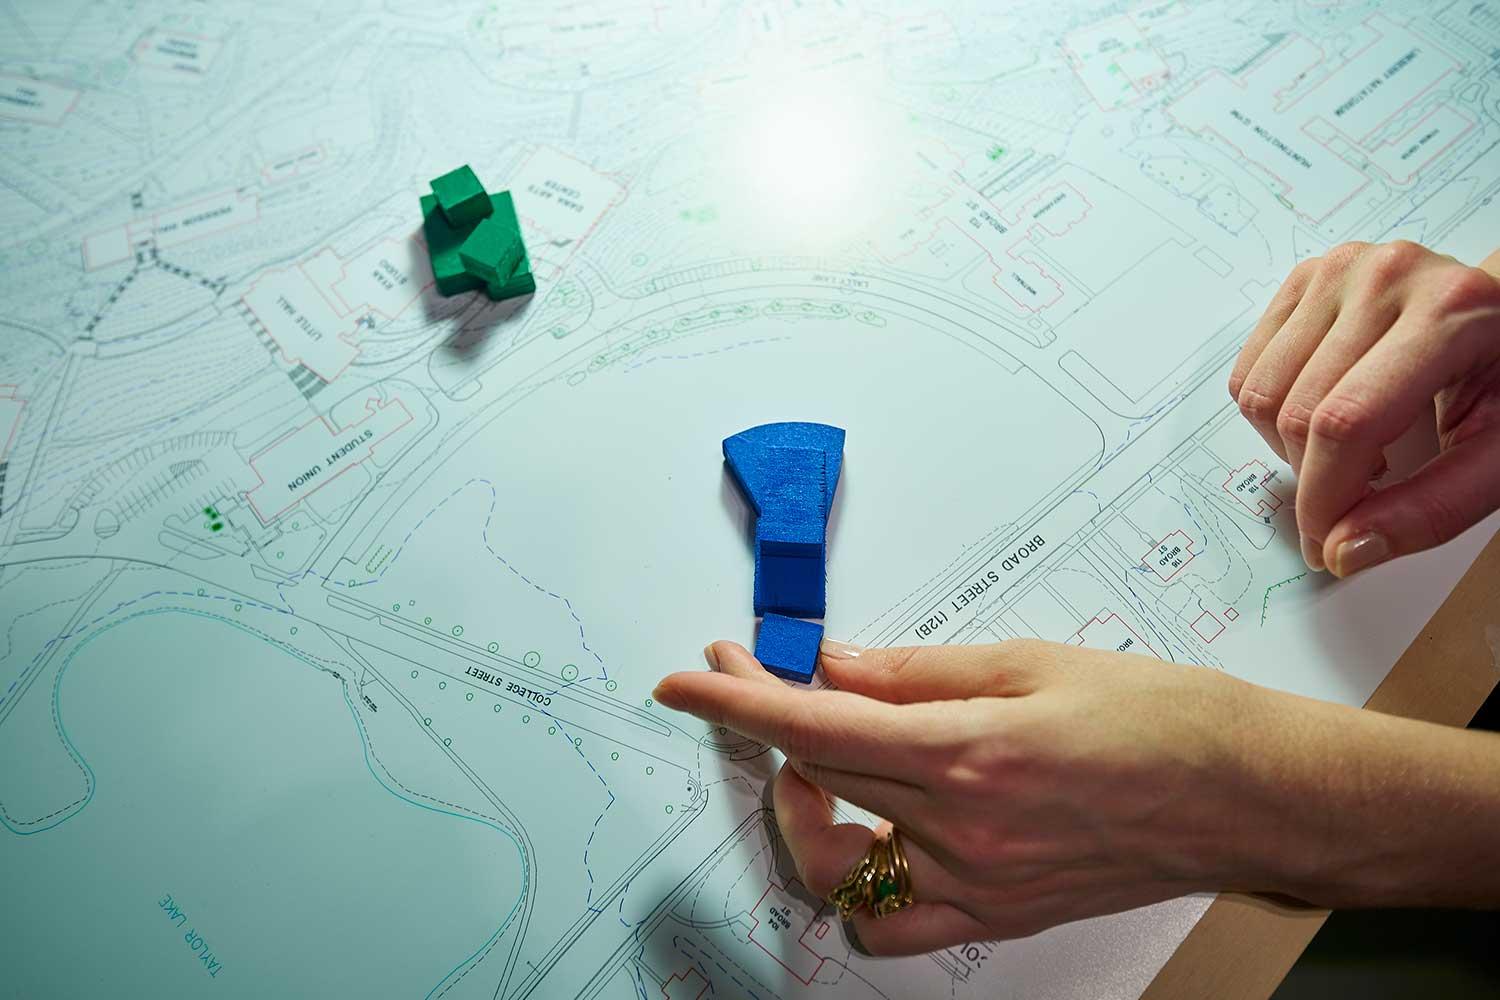 Hand holds model of building on campus map